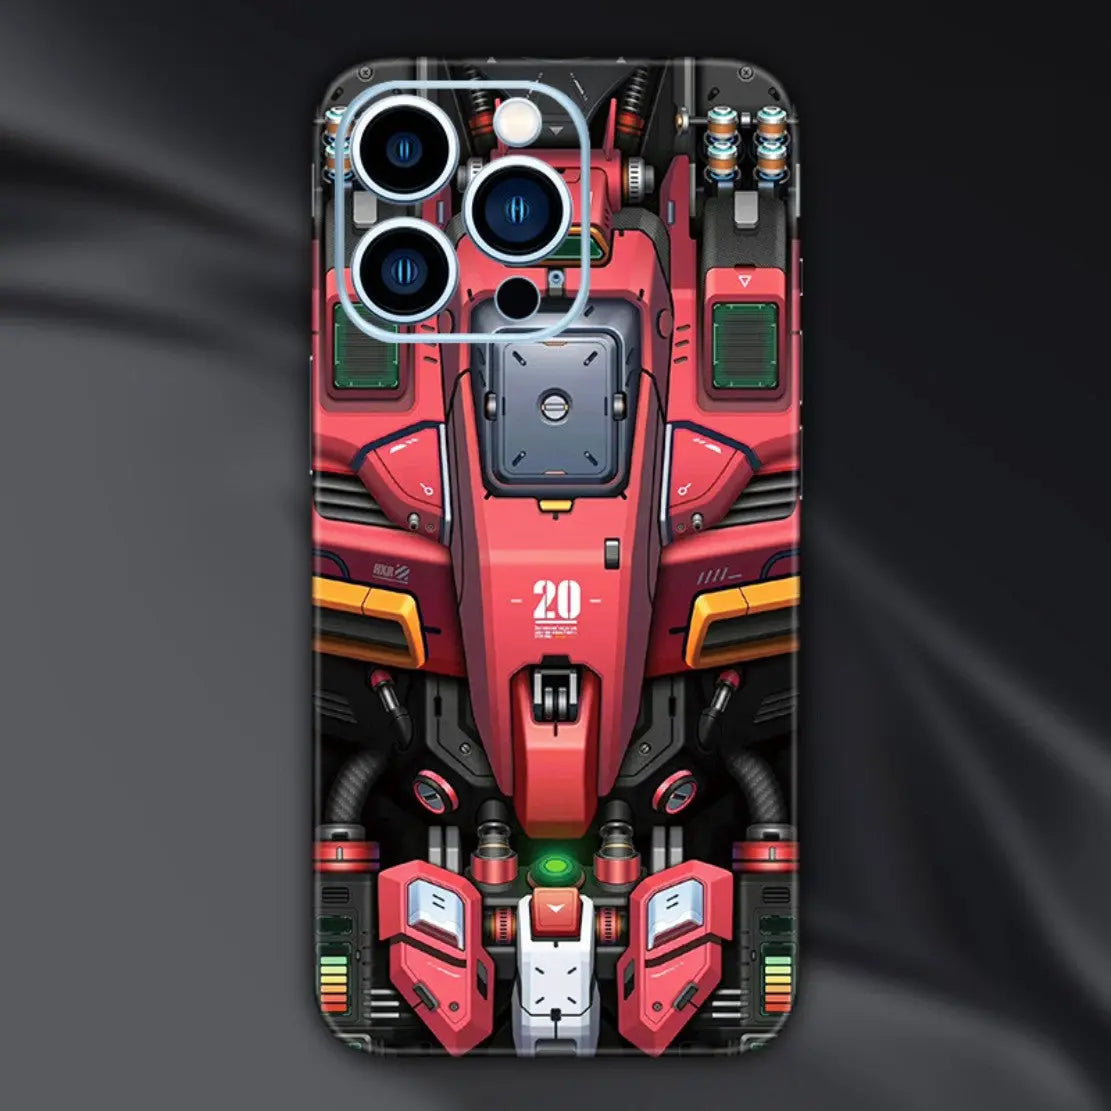 fighter mobile phone case phone case iphone
Samsung cases
OnePlus cases
Huawei cases